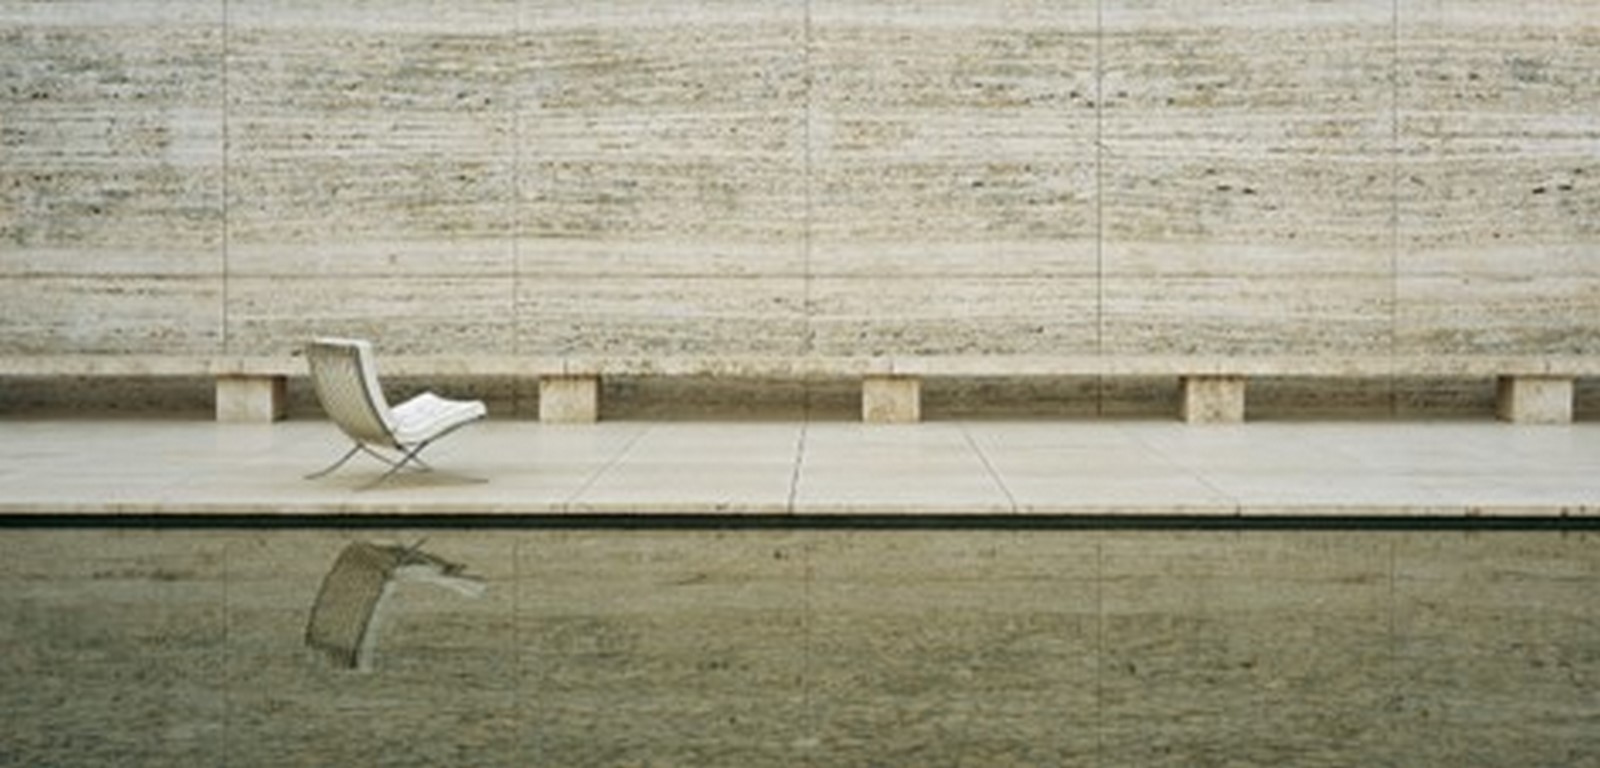 Masterpiece that Changed the History of Architecture- The Barcelona Pavilion by Ludwig Mies van der Rohe and Lilly Reich - Sheet11